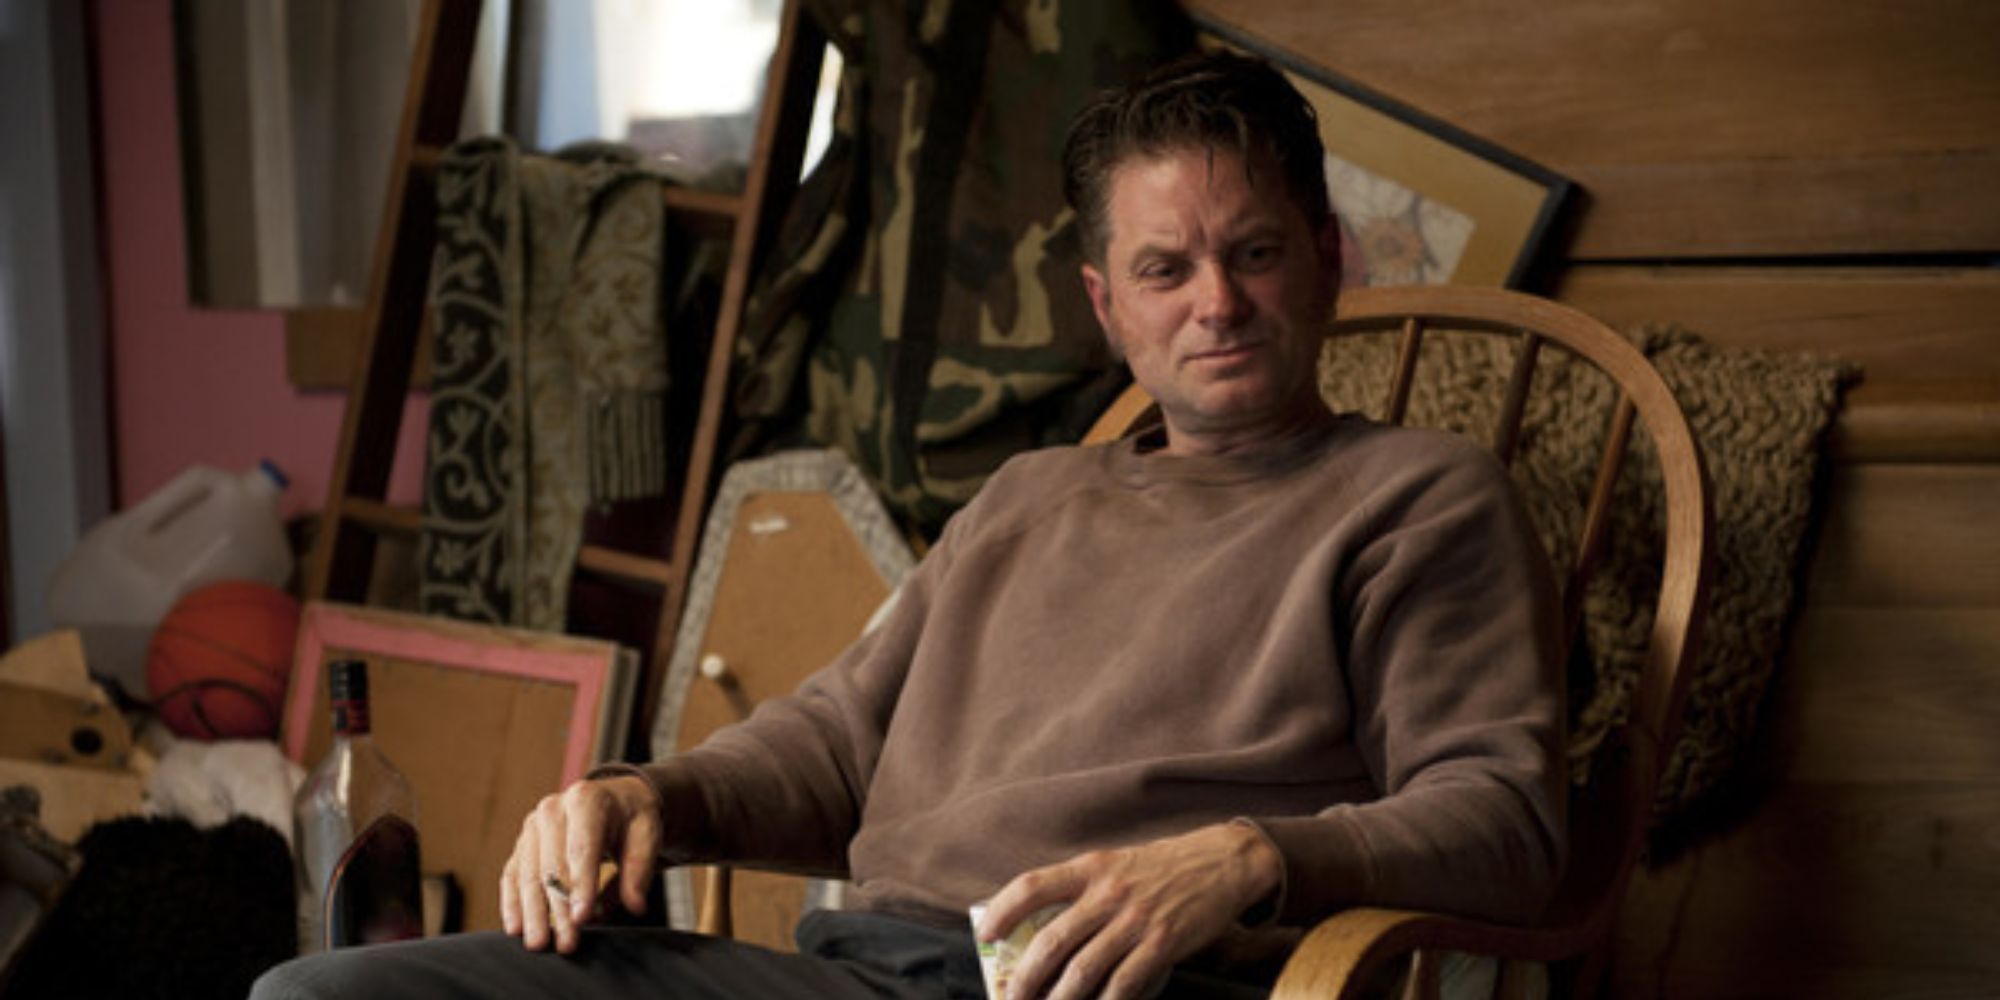 A man sitting on a chair with a mess behind him